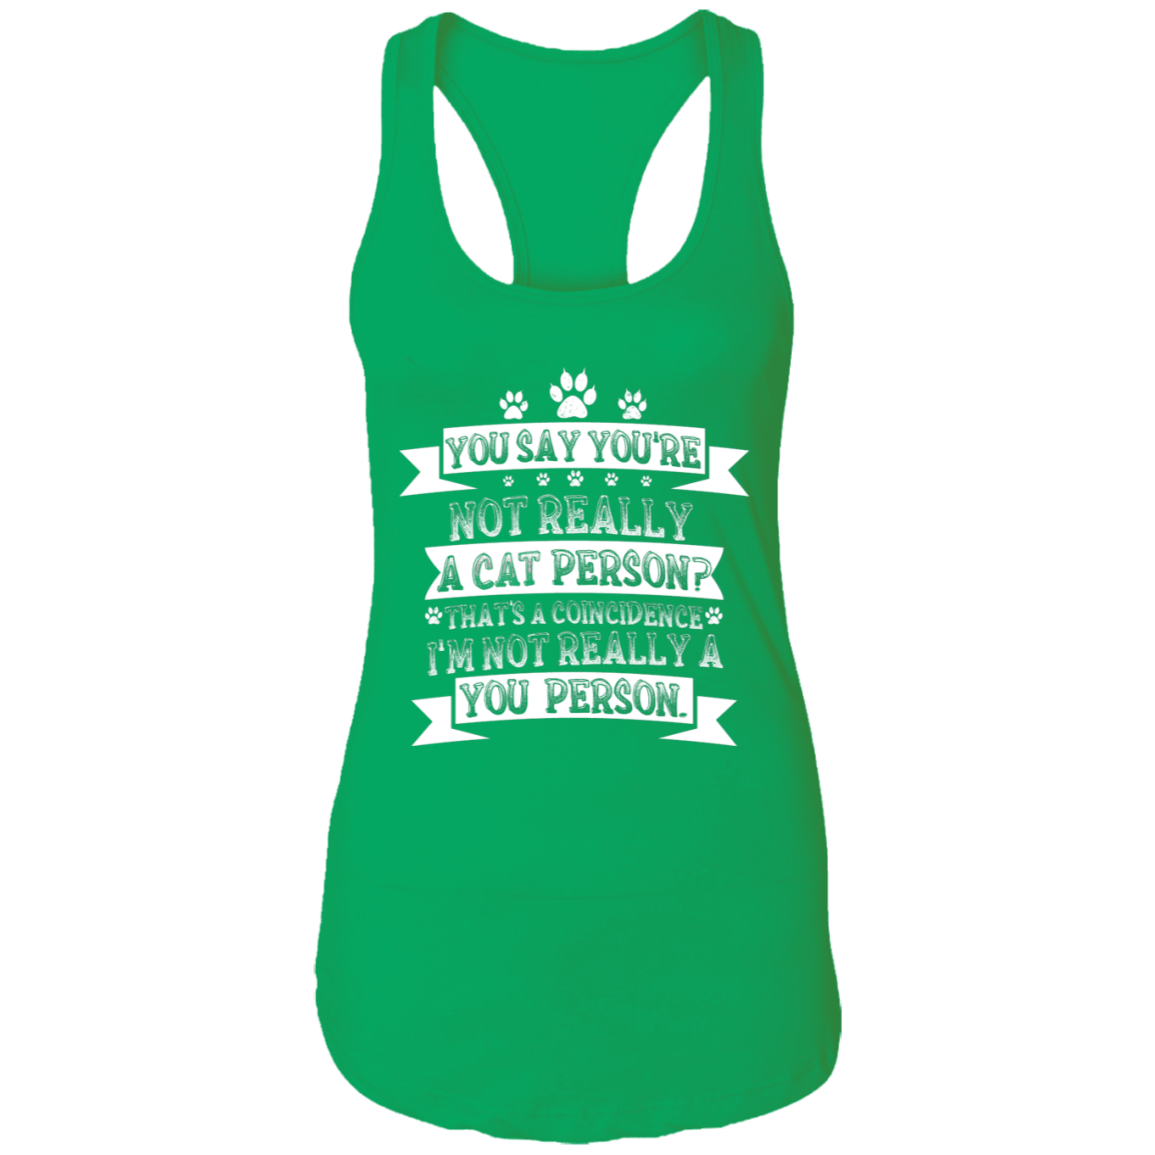 Not Really A Cat Person - Ladies Racer Back Tank.